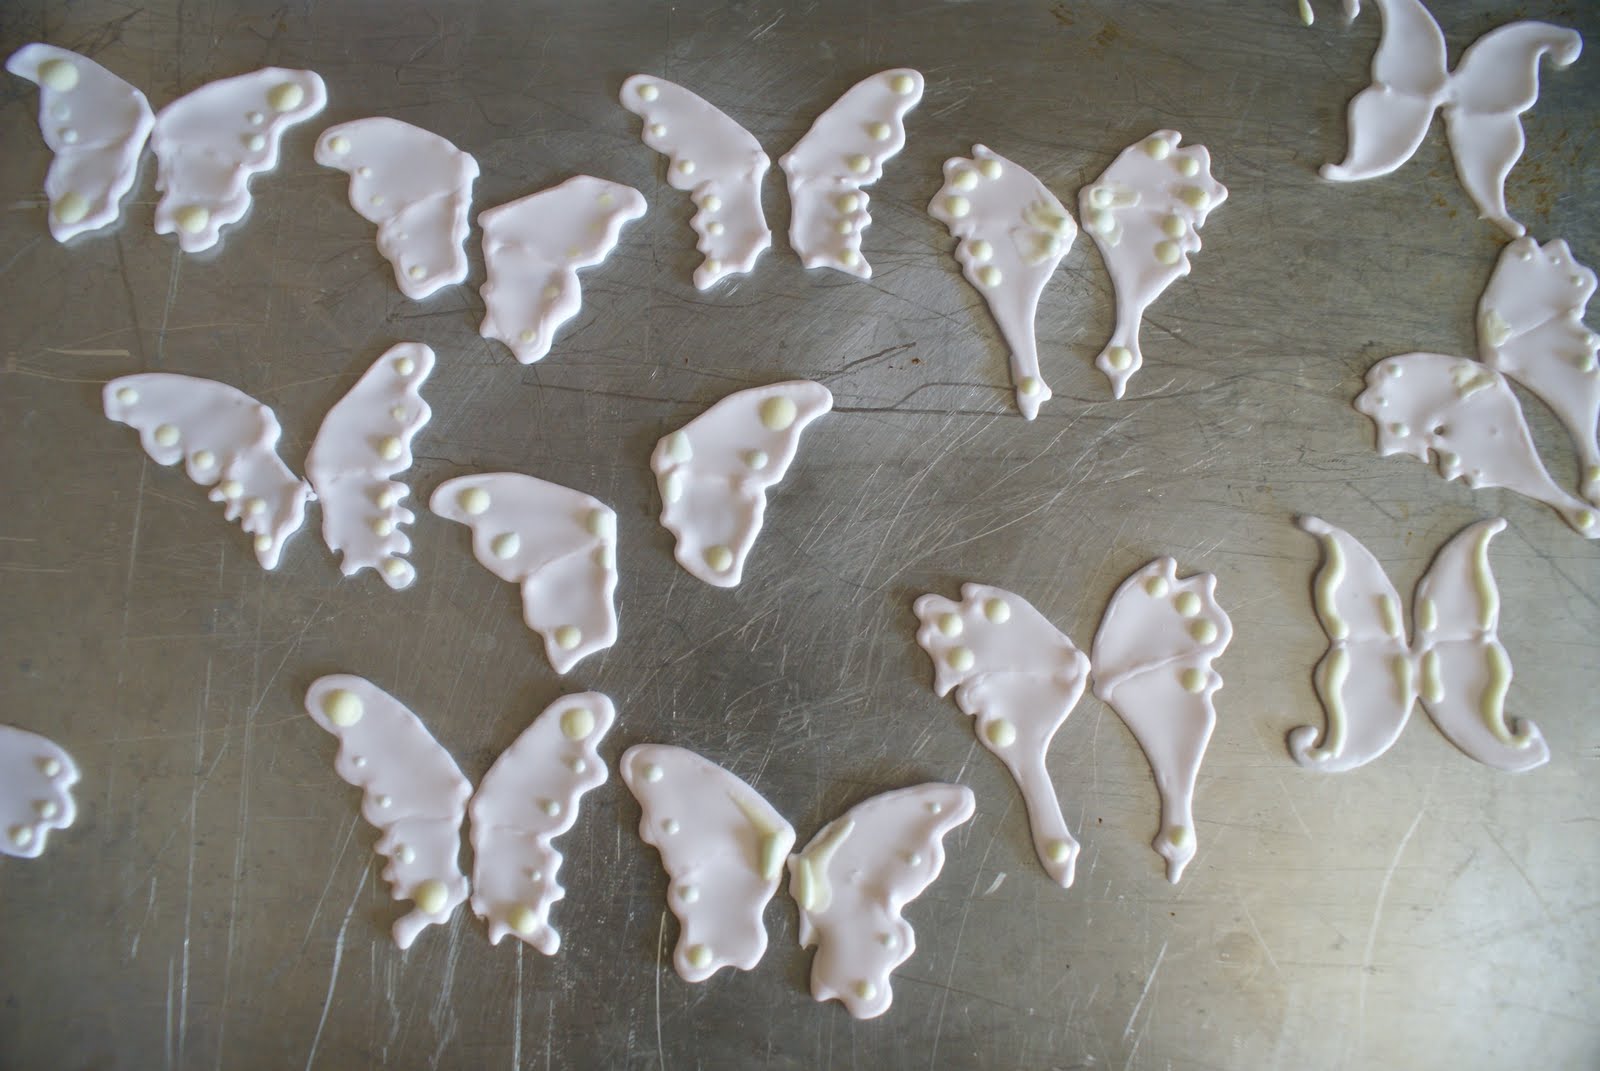 here the wings on are wings to  on butterfly dried wings the make how paper waxed cupcakes